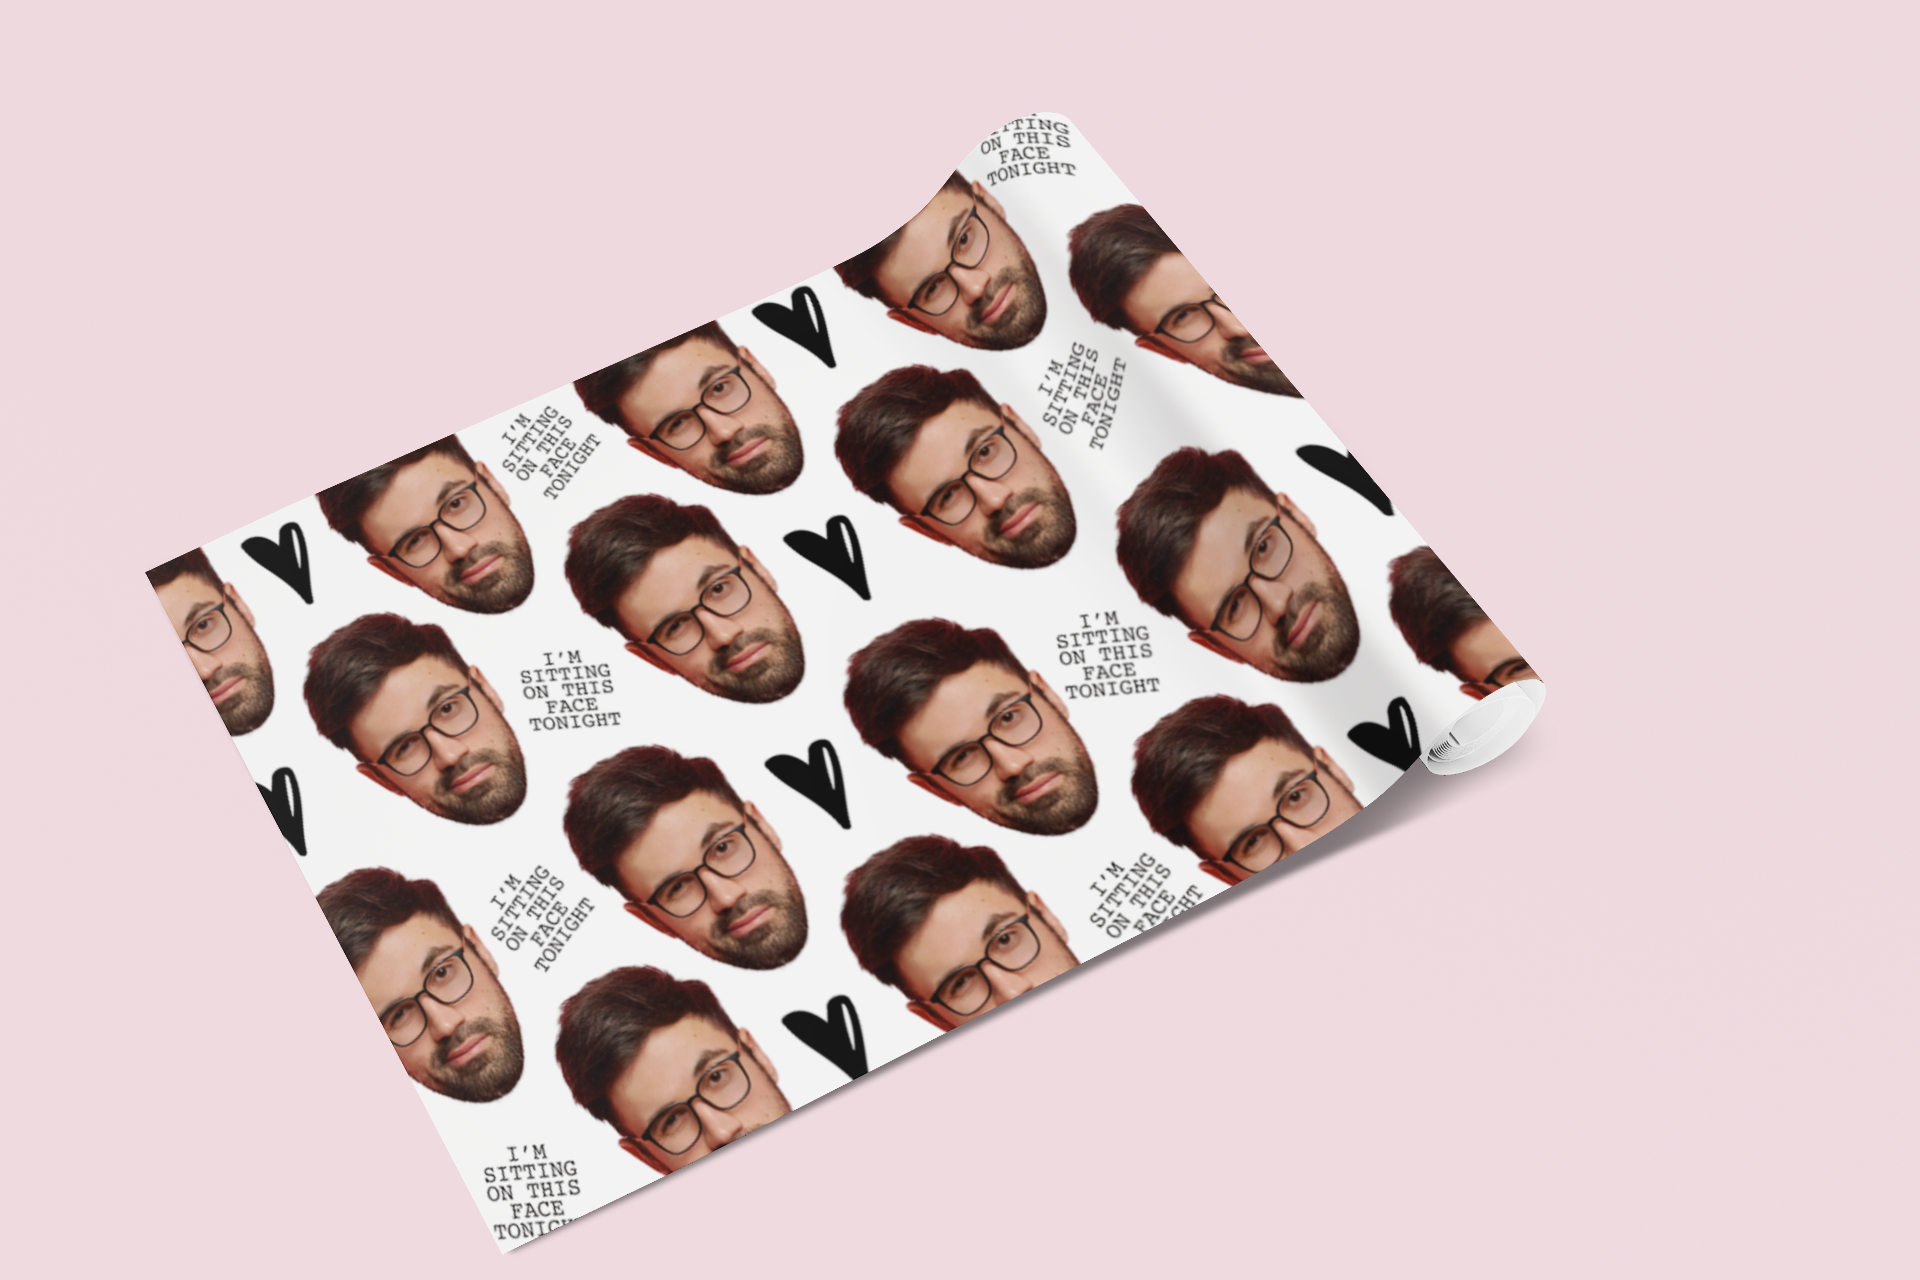 A roll of white gift wrap featuring a cut out face of a man & a funny quote 'i'm sitting on this face tonight' printed through out.